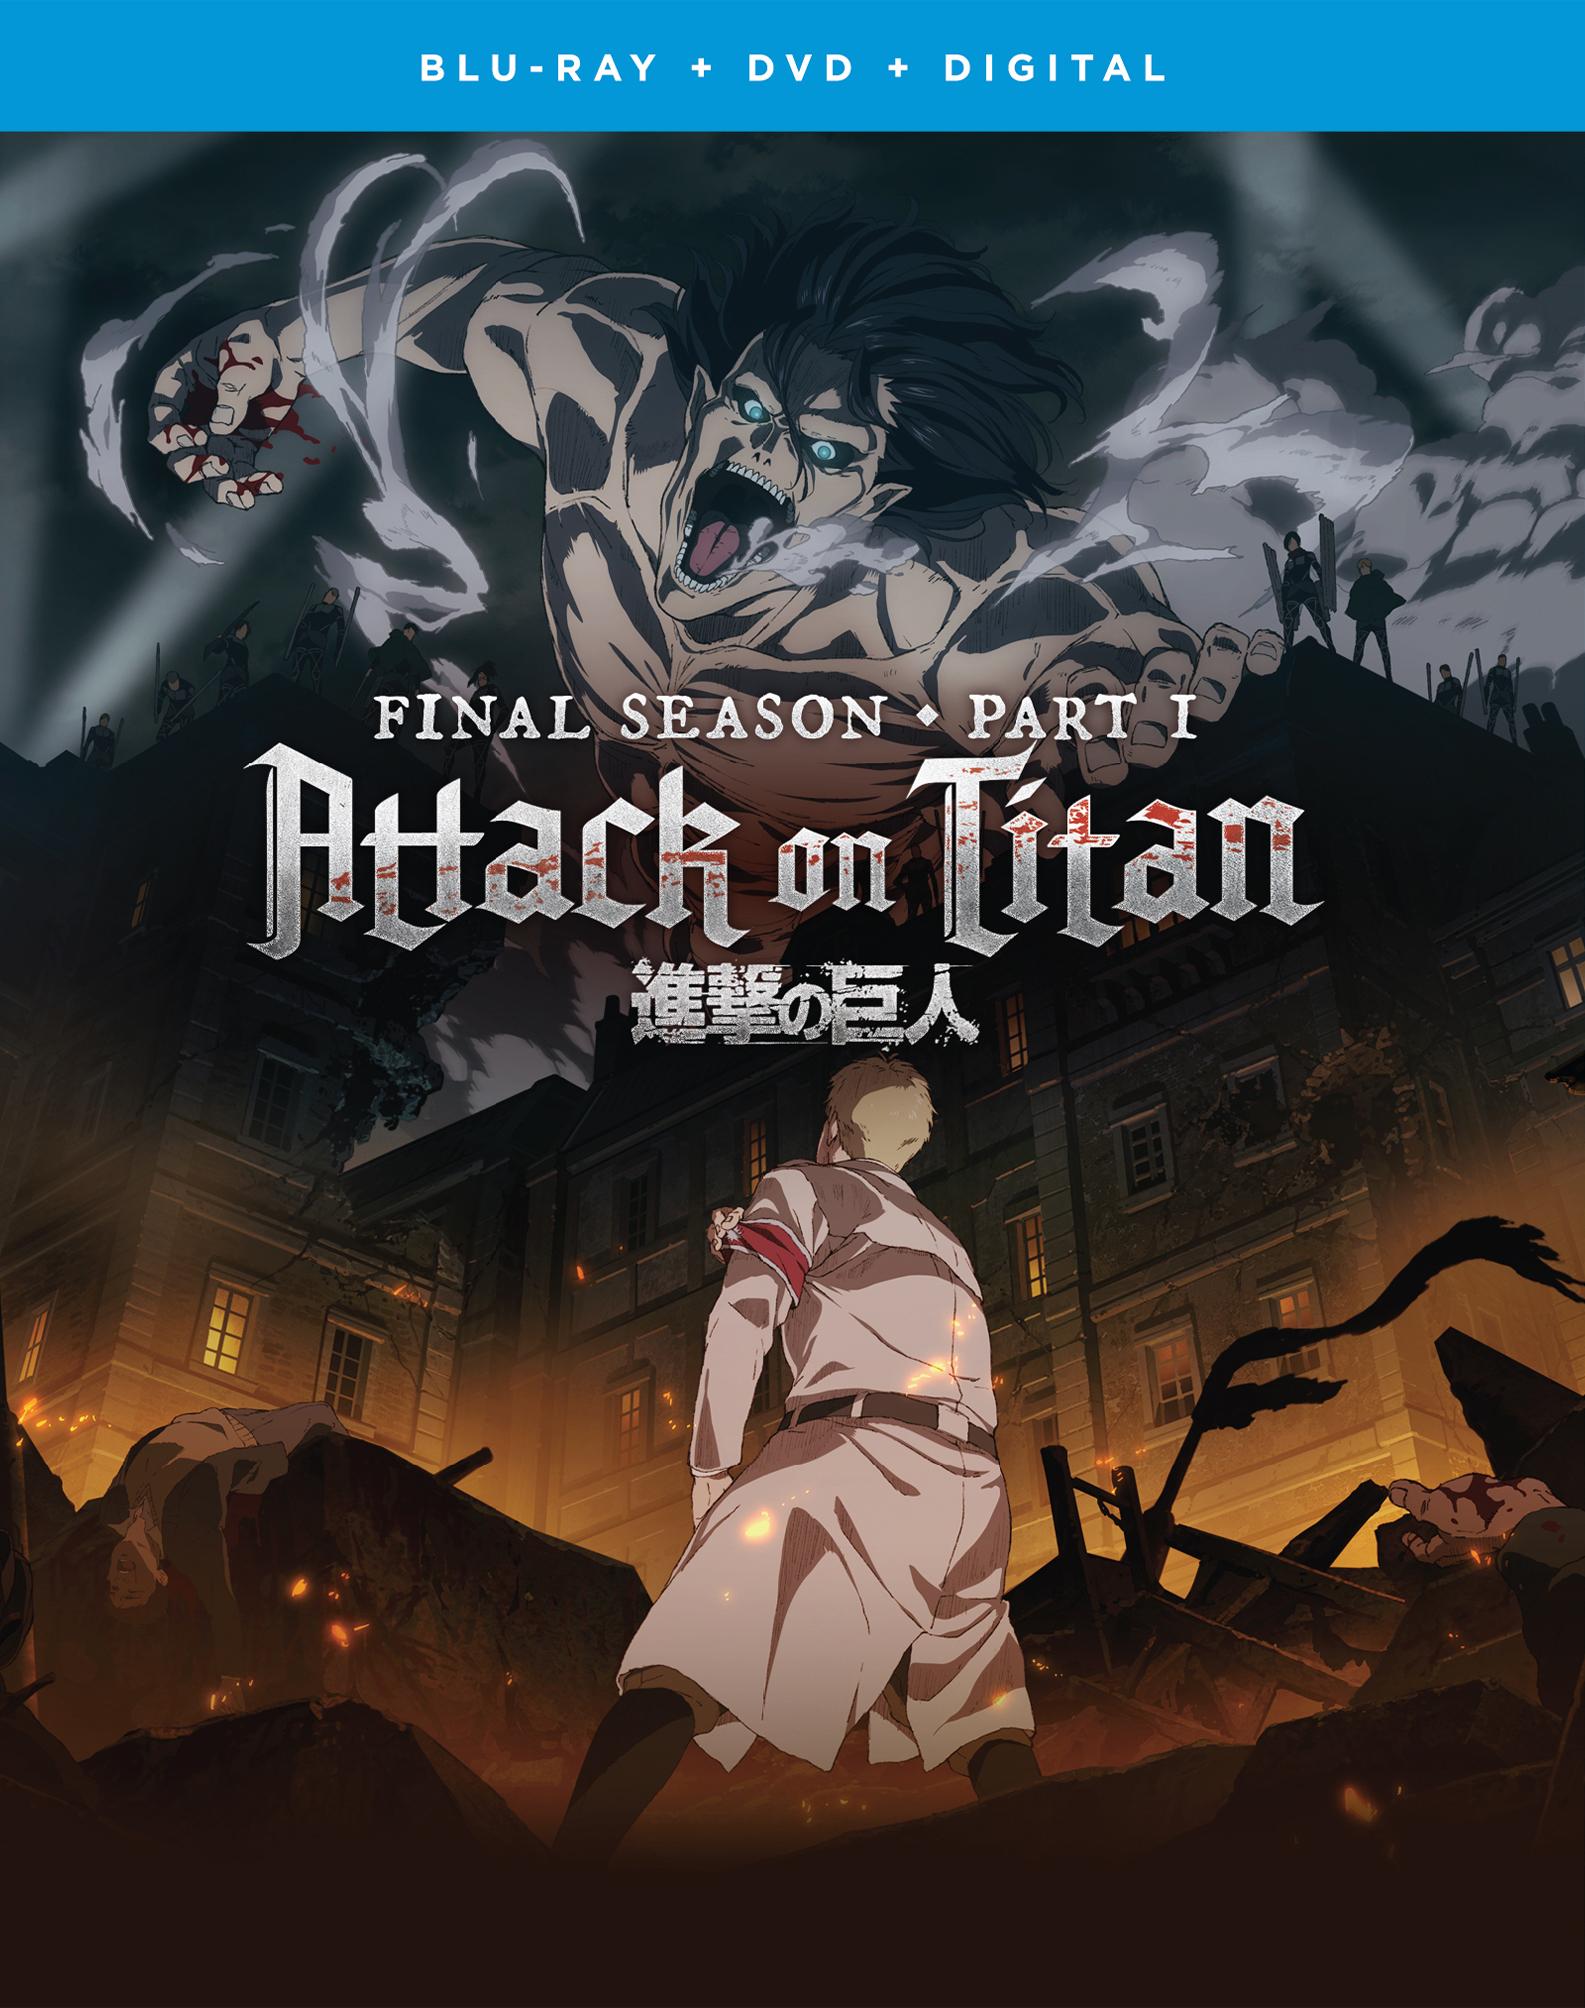 Attack on Titan Final Season Attack on Titan Final Season THE FINAL  CHAPTERS Special 1 - Watch on Crunchyroll